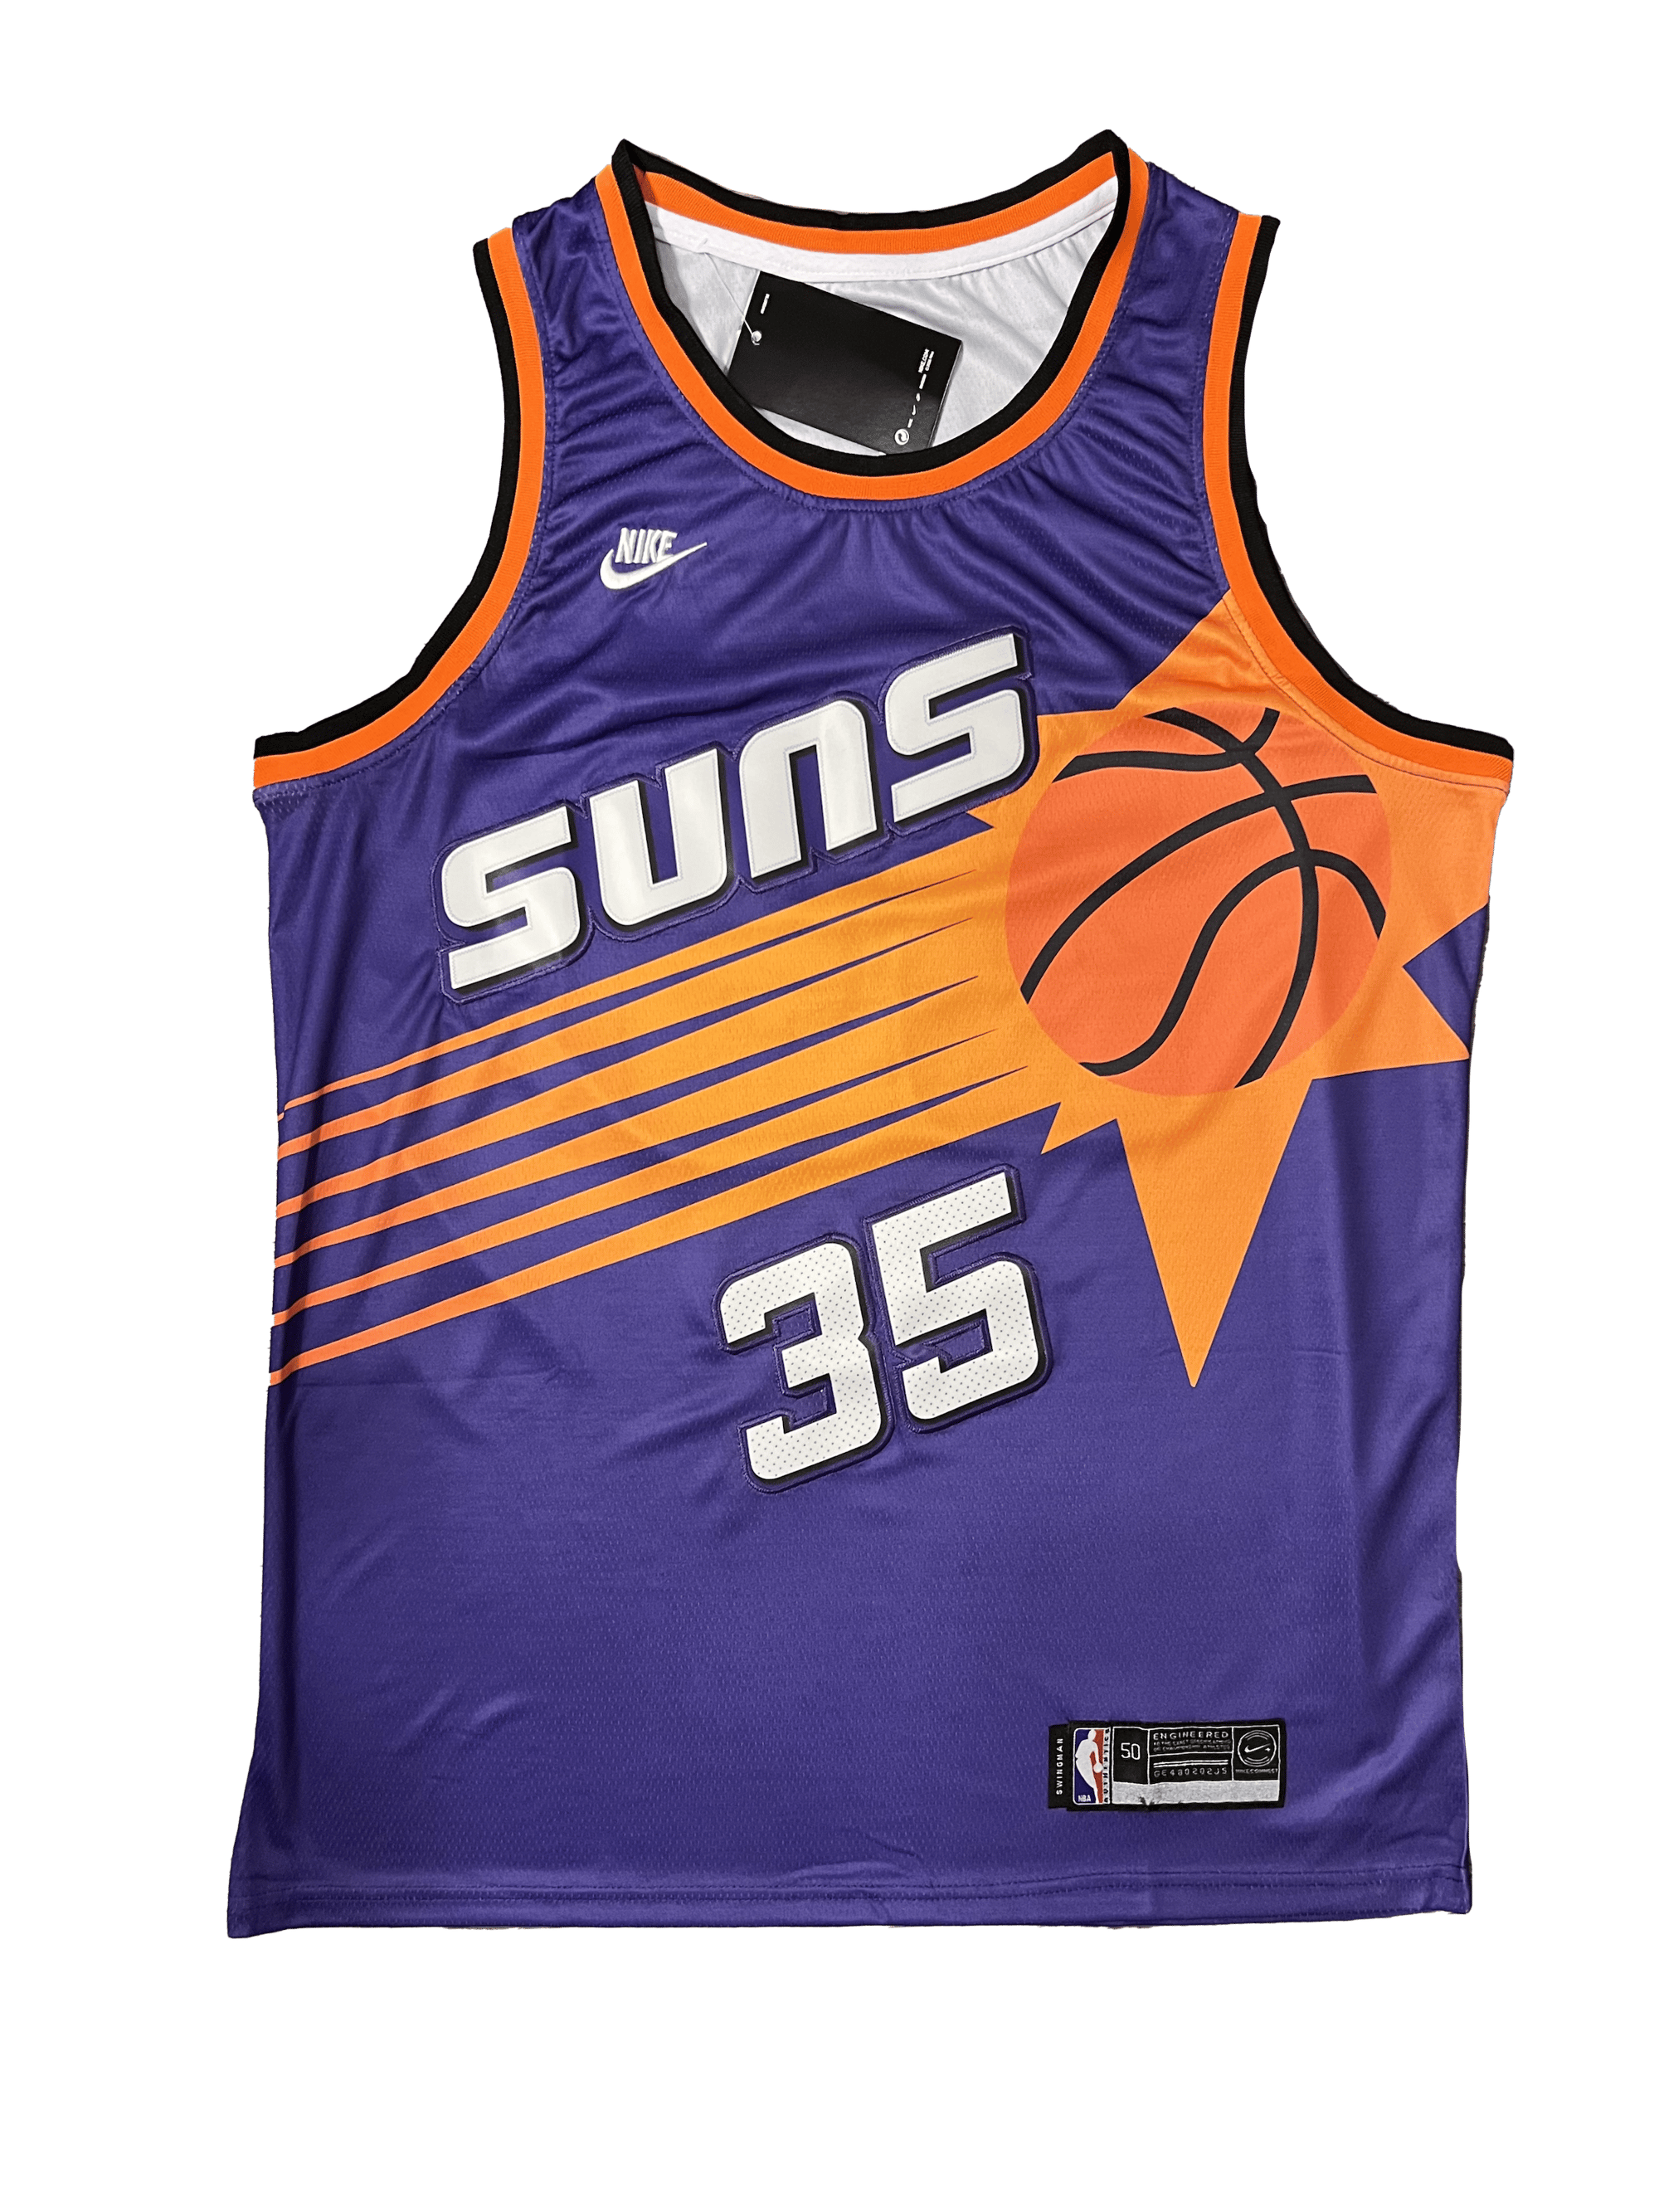 kevin durant jersey price